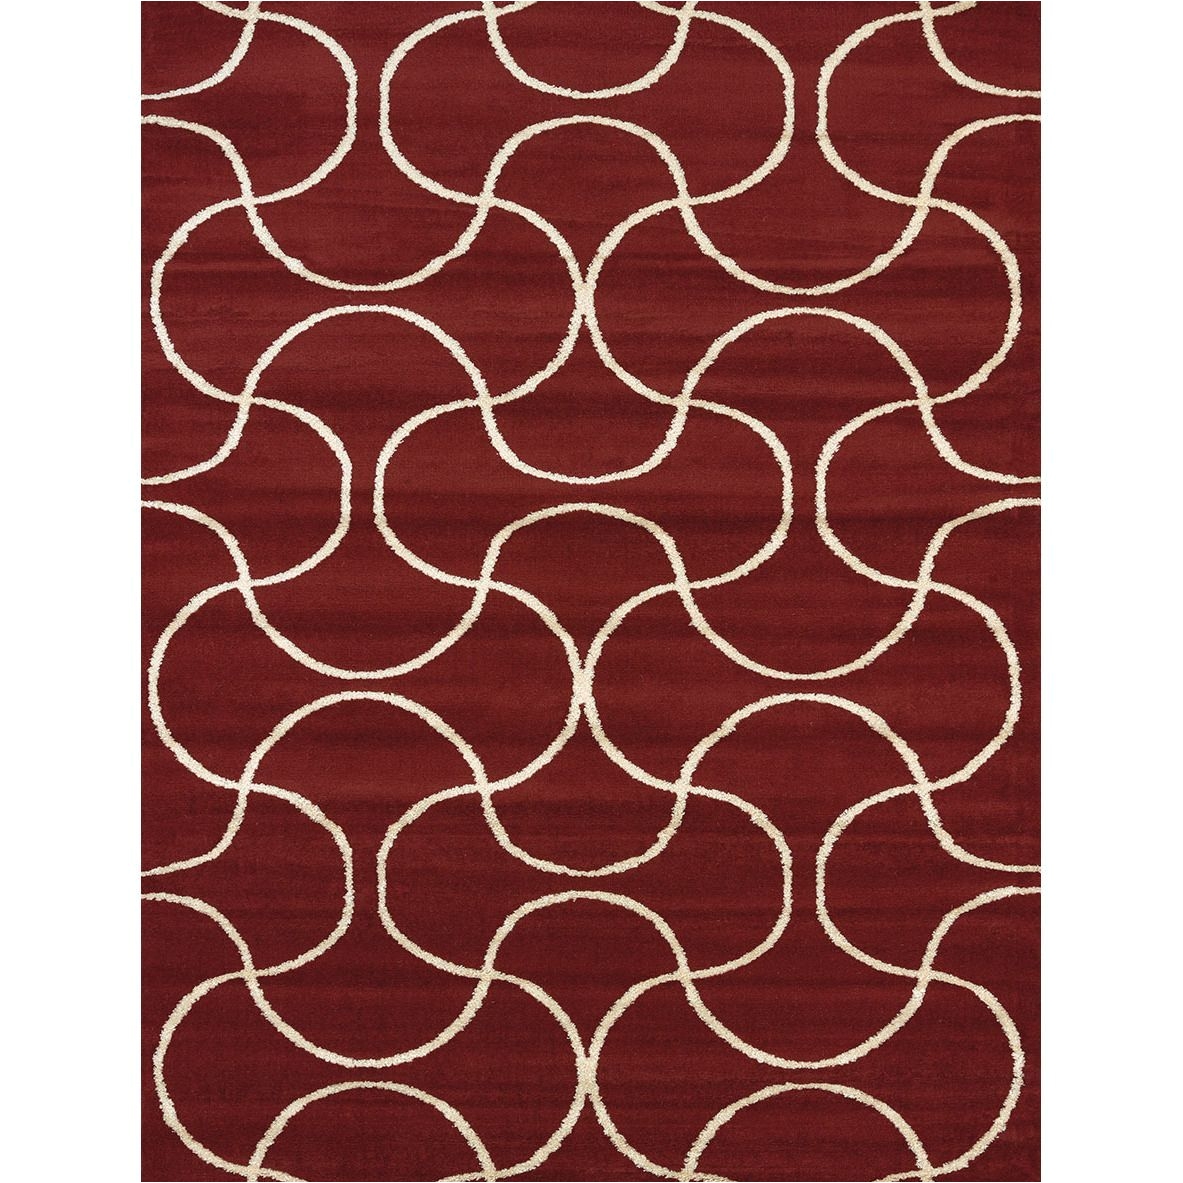 westfield home effects keira multi texture area rug 5 3 x 7